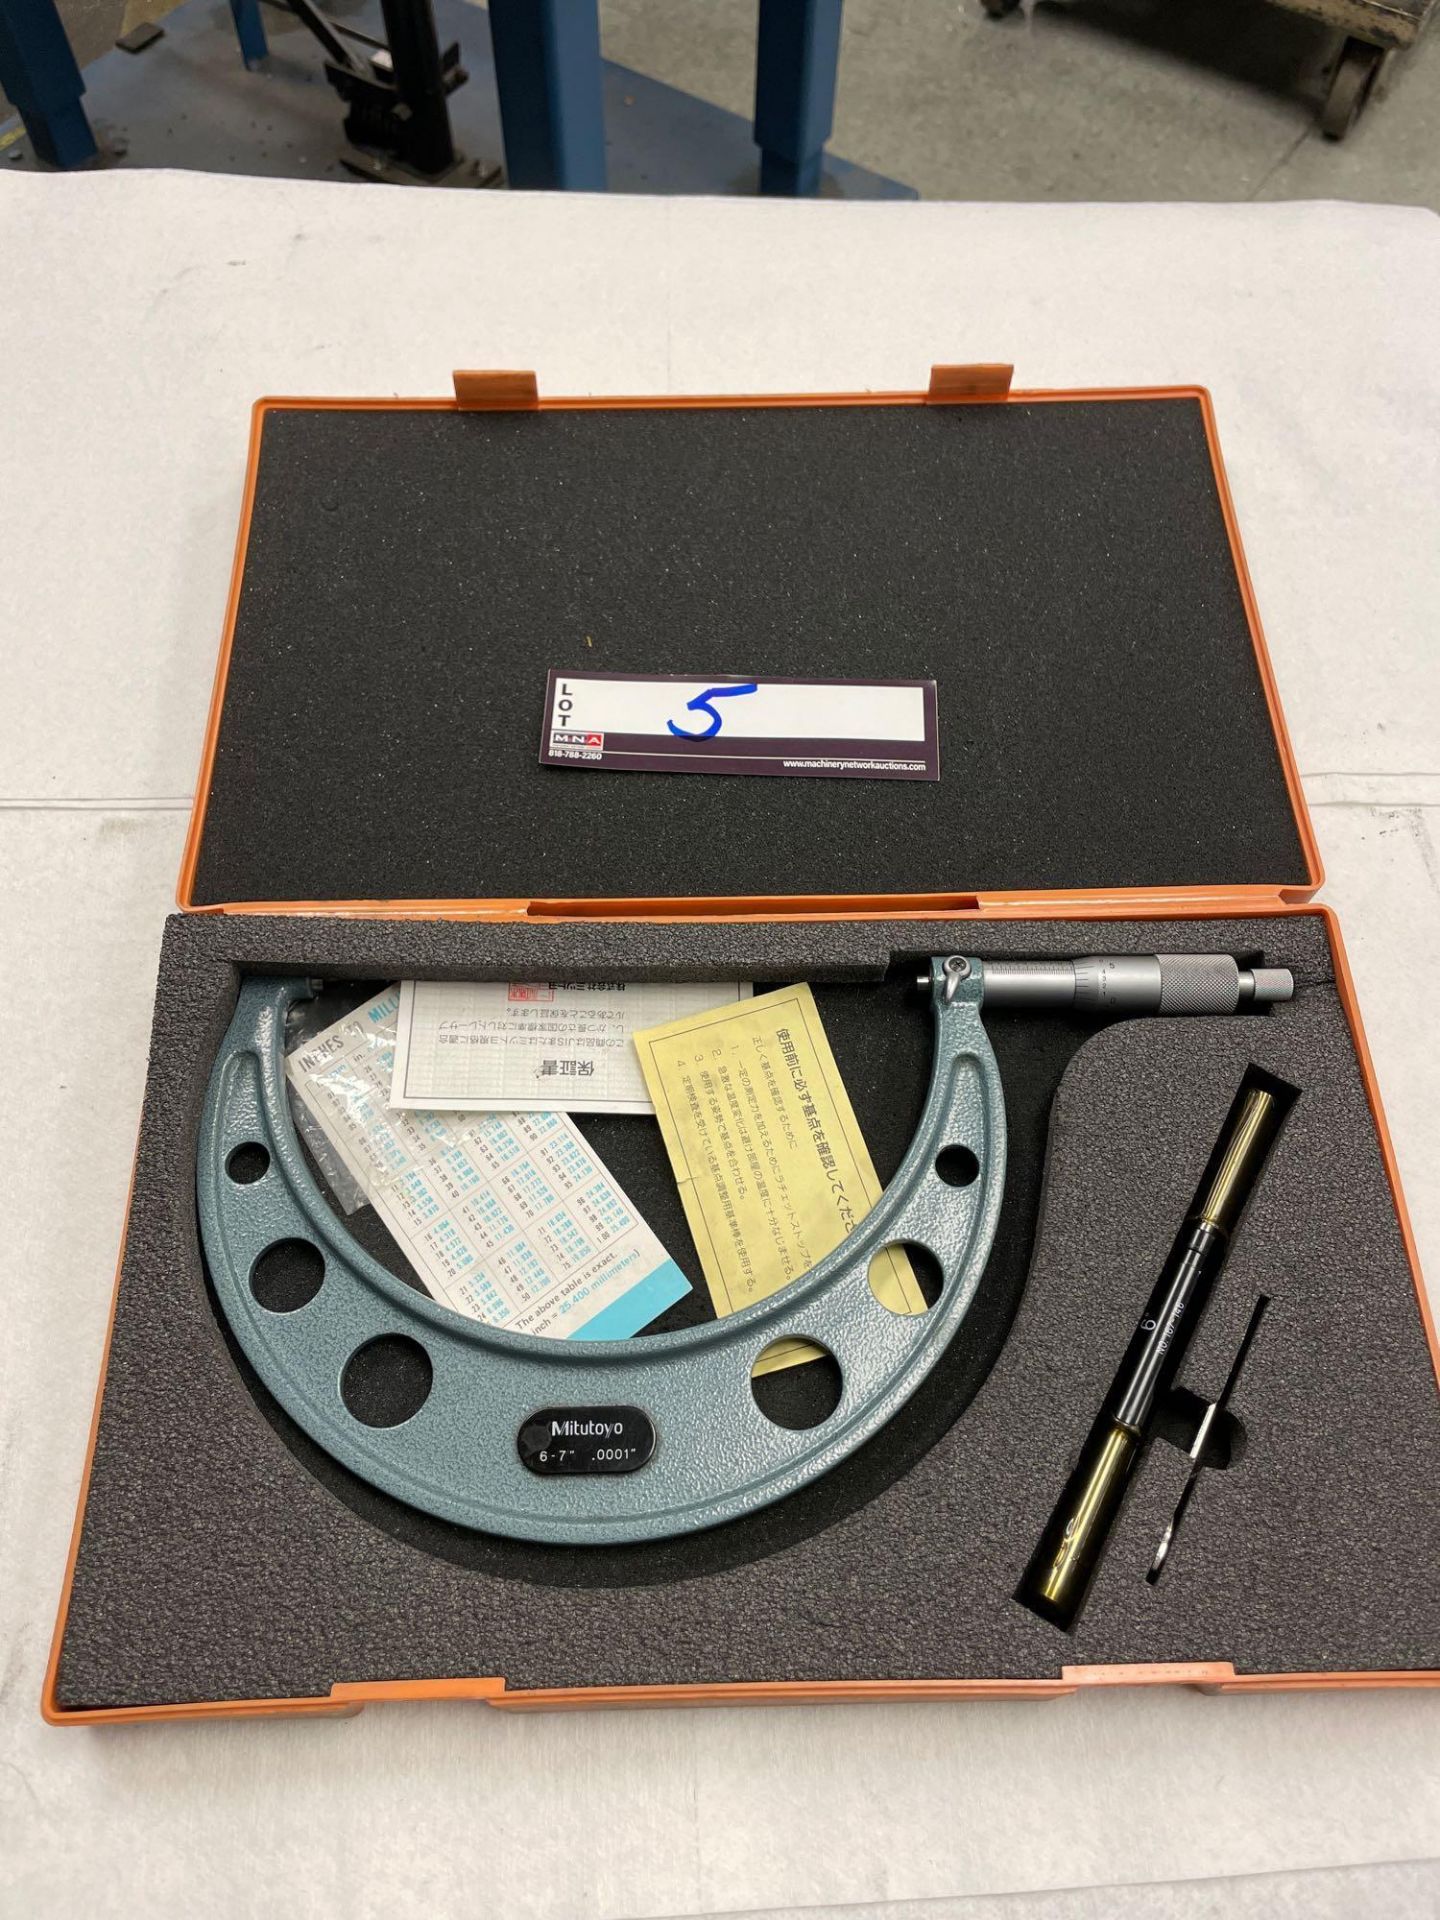 Mitutoyo 6" - 7" Outside Micrometer - Image 4 of 4